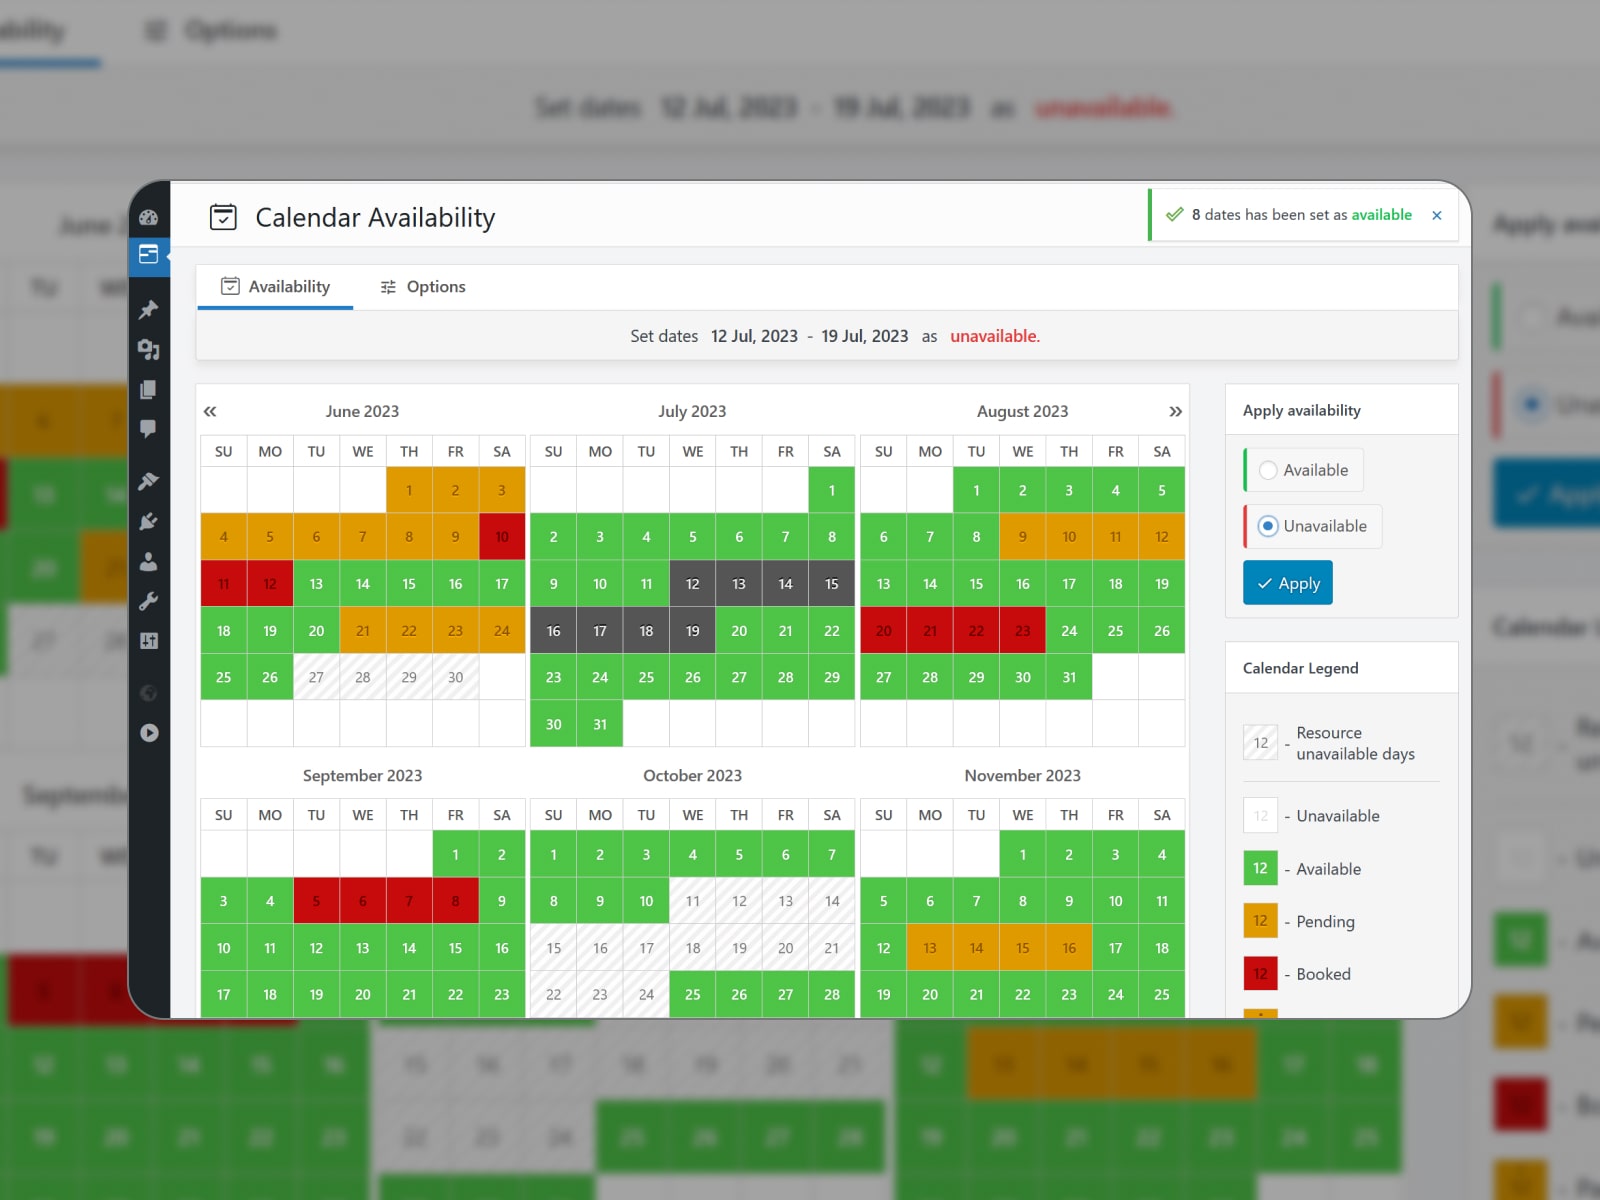 The landing page of Booking Calendar.